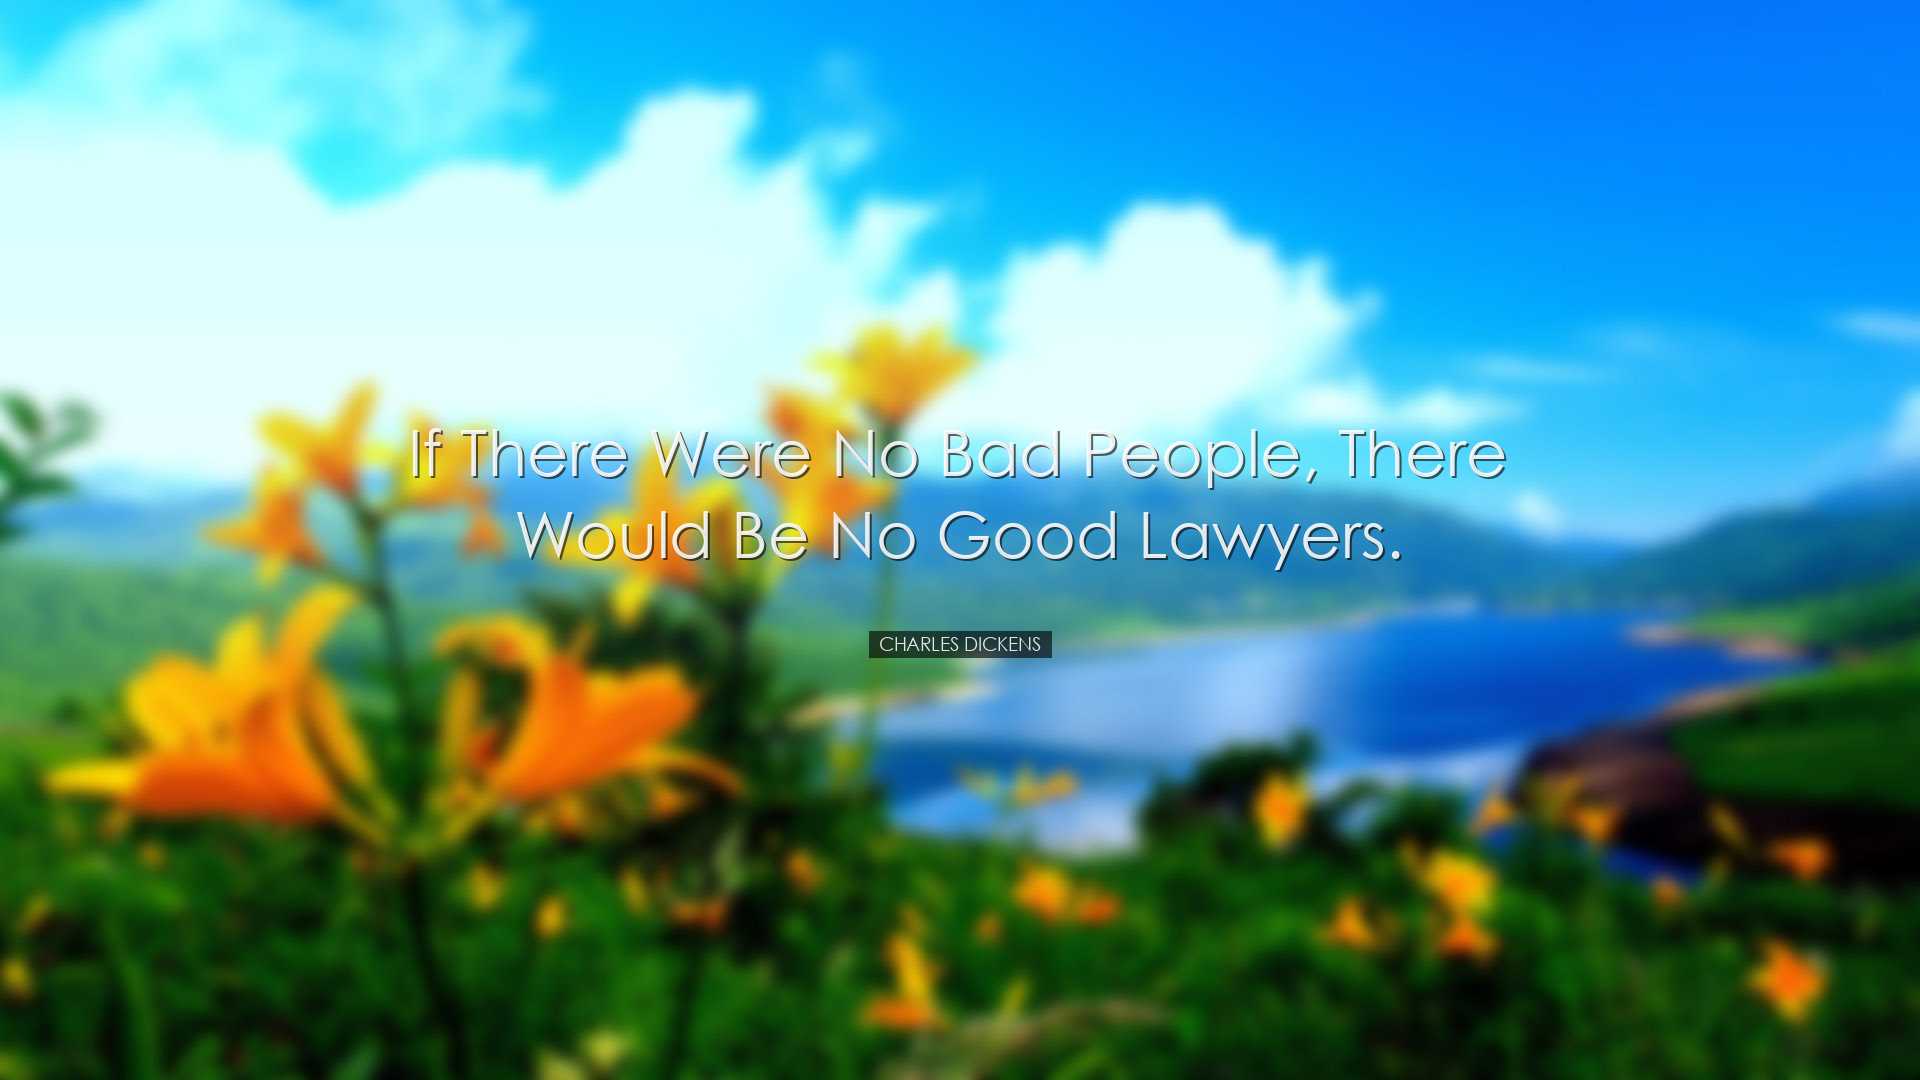 If there were no bad people, there would be no good lawyers. - Cha